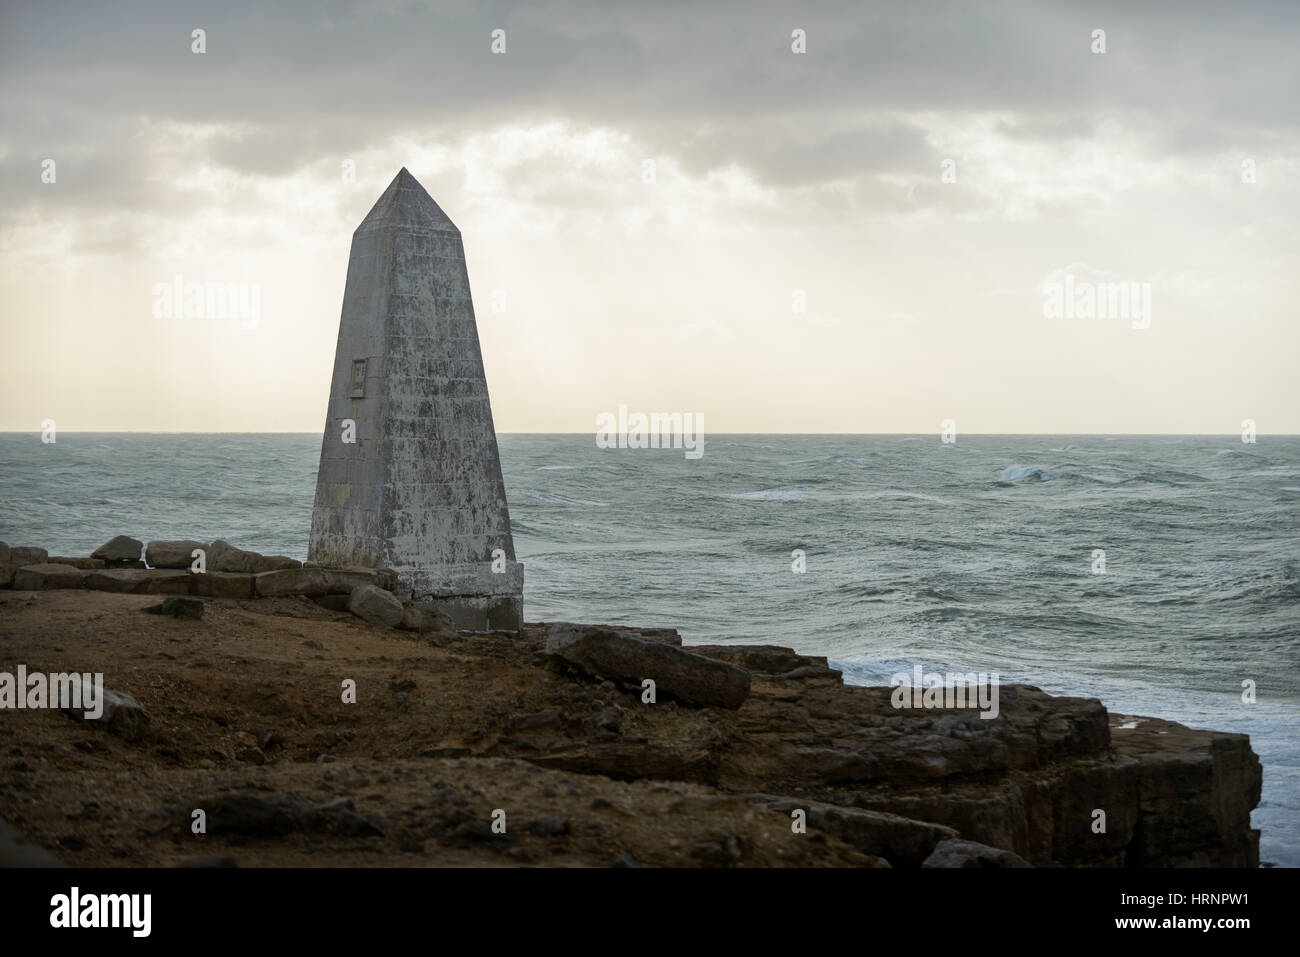 Rough seas and stormy skies off of Portland Bill behind the monument, Portland, Dorset, UK Stock Photo